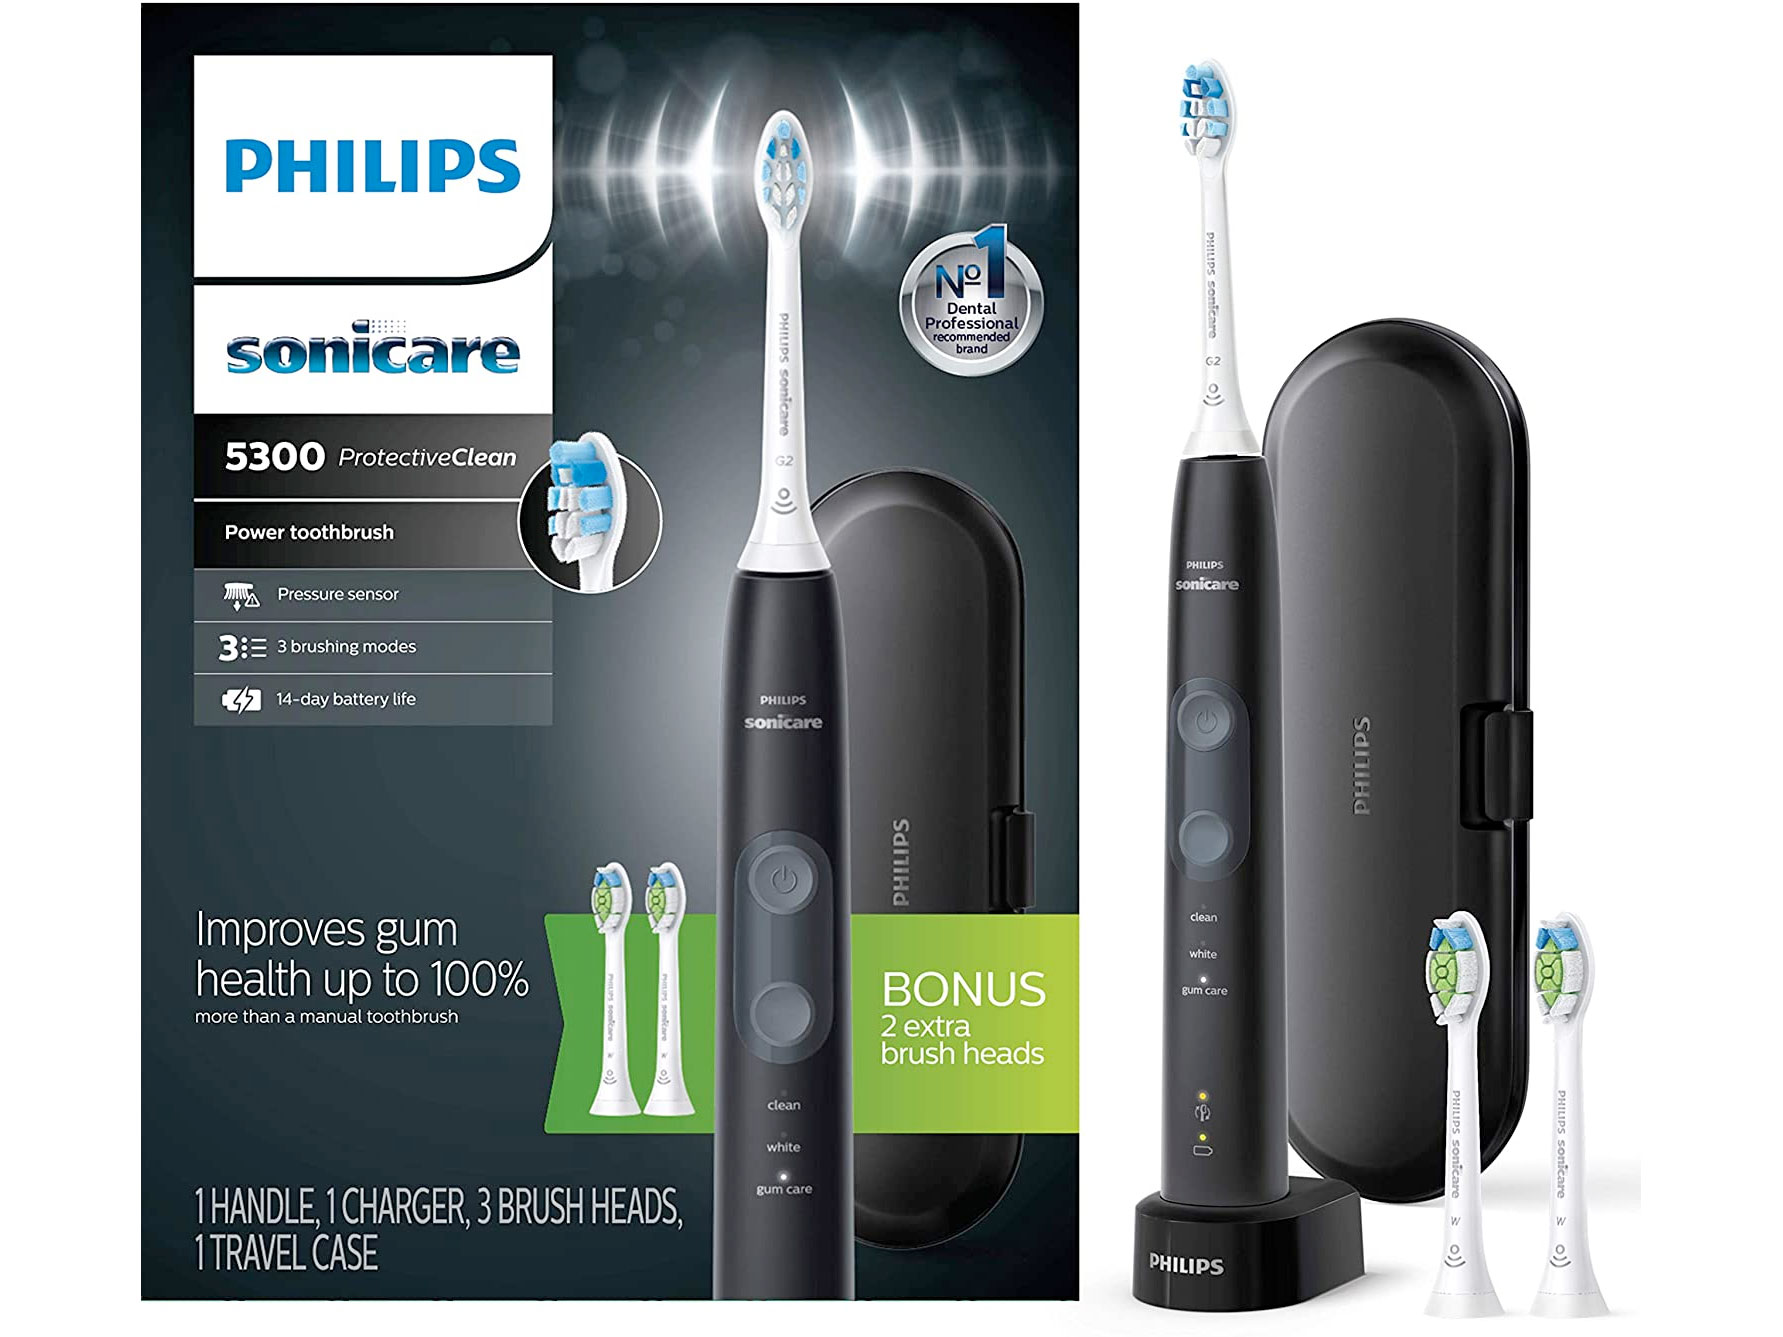 Amazon：Philips Sonicare ProtectiveClean 5300电动牙刷只卖$89.95